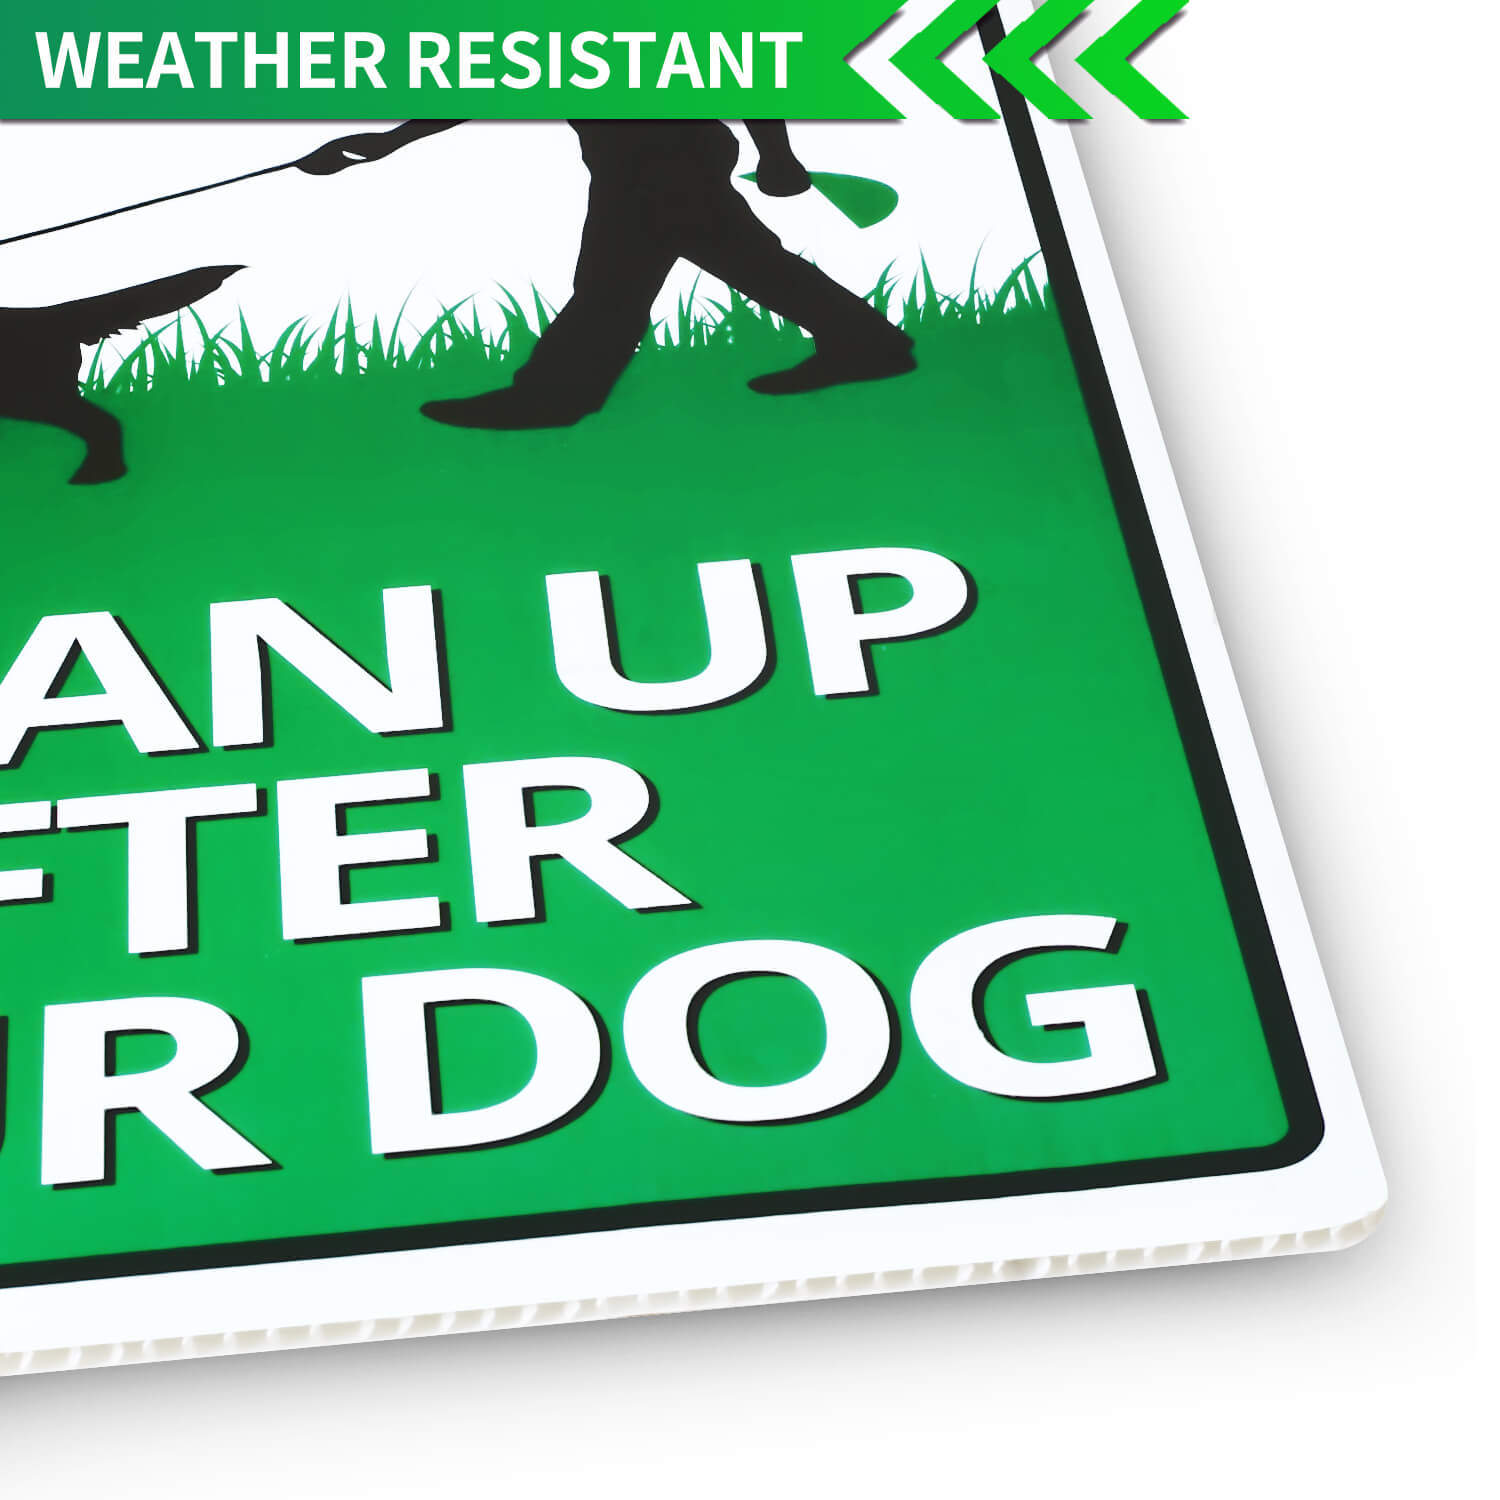 Waterproof Weather Resistant 12 x 9 Clean Up After Your Pets Sign Easy to Mount Clean Up After Your Dog Sign, 2 Pack Double Sided with Metal Wire H-Stakes Stands Corrugated Plastic Non-fading